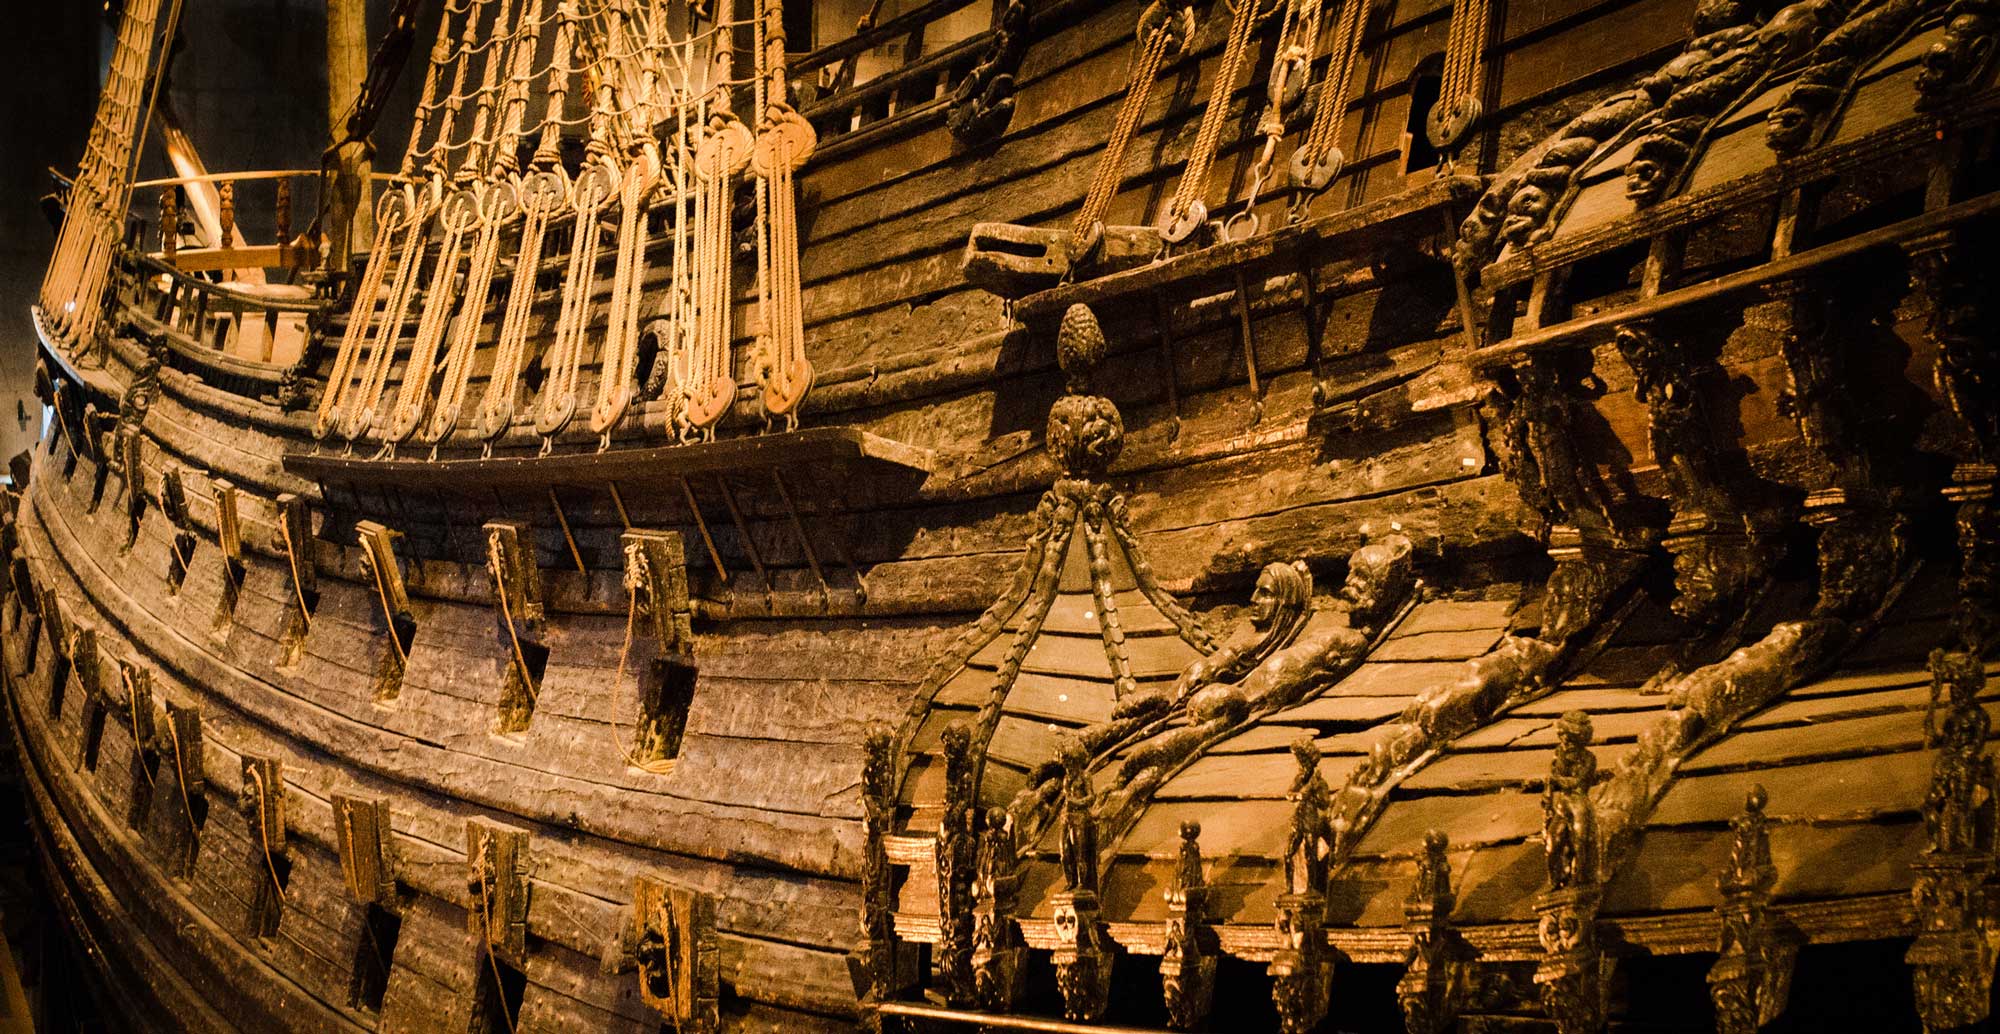 The exterior of the Vasa ship that capsized and sank in Stockholm 1628.